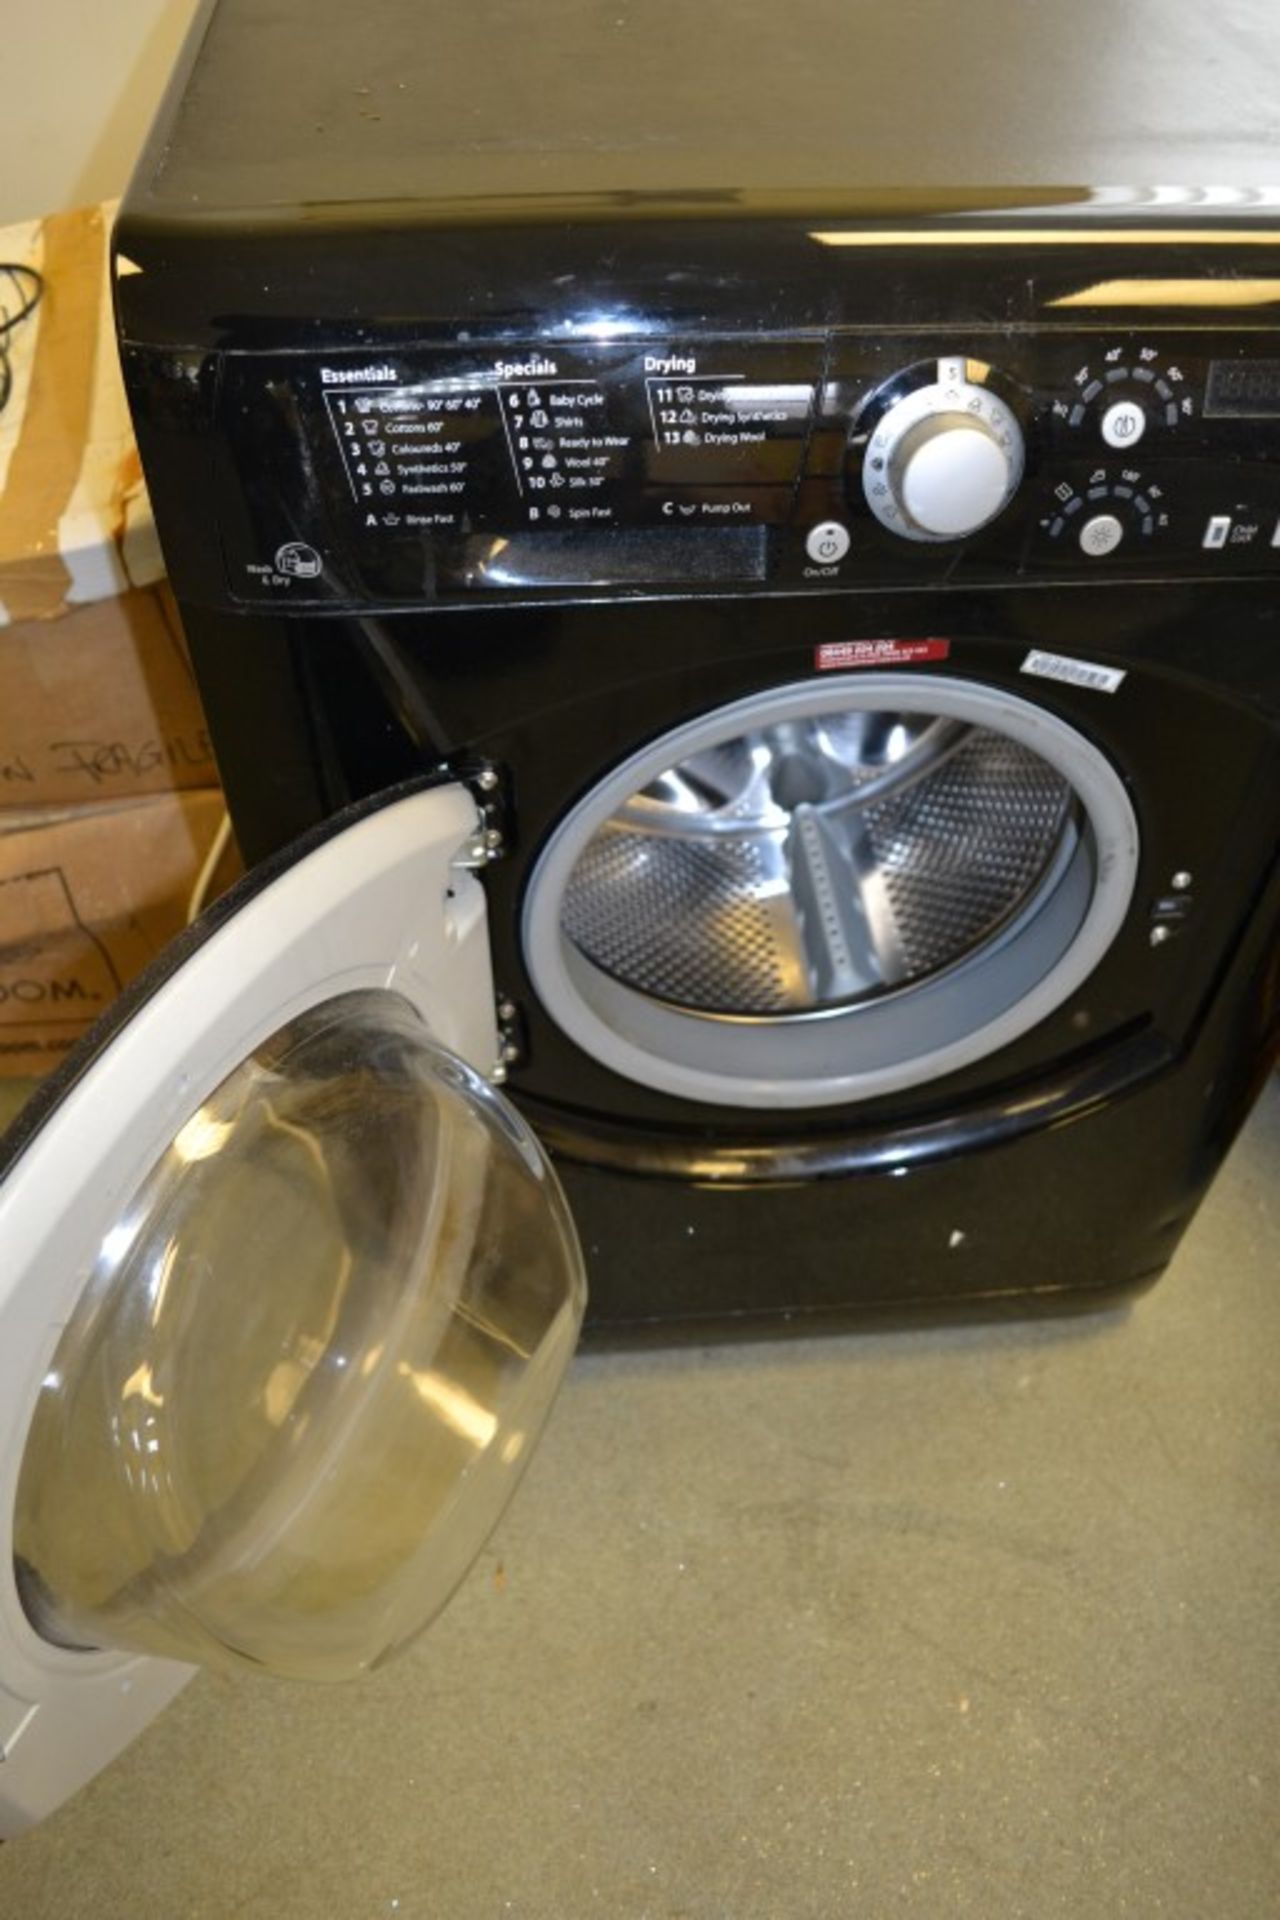 1 x Hotpoint Washing Machine (Model: WDF740 Aquarius) - 7kg Capacity - From A Clean Manor House - Image 5 of 6